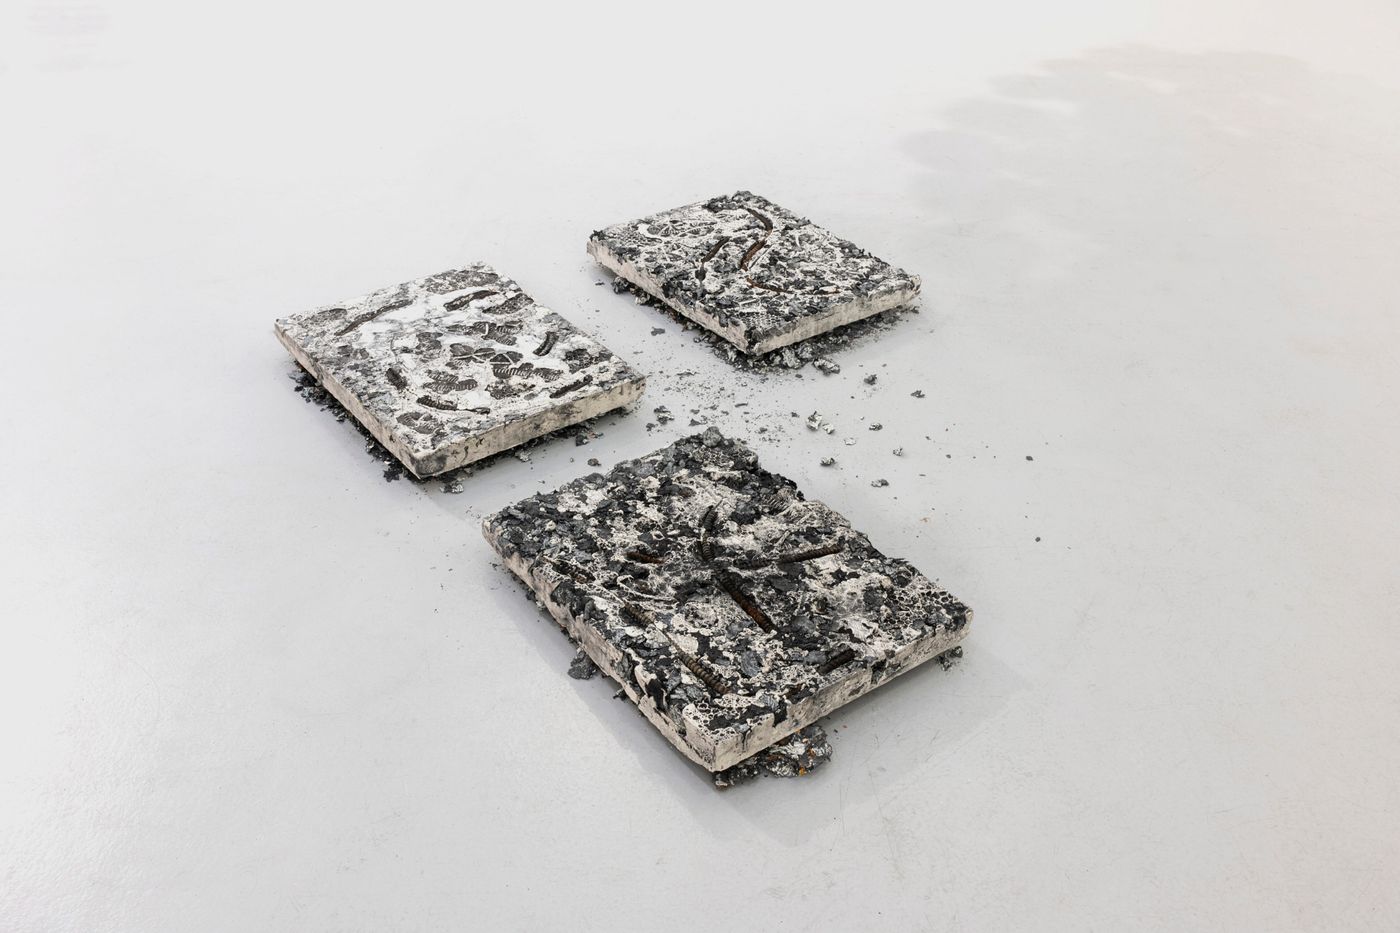 Fossil I, II, & III, 2022. Oil paint fragments, clay, steel, shells, hadrosaur fossils and graphite dust casted into plaster; each approximately 24 x 18 in. Photo: Allison Minto.